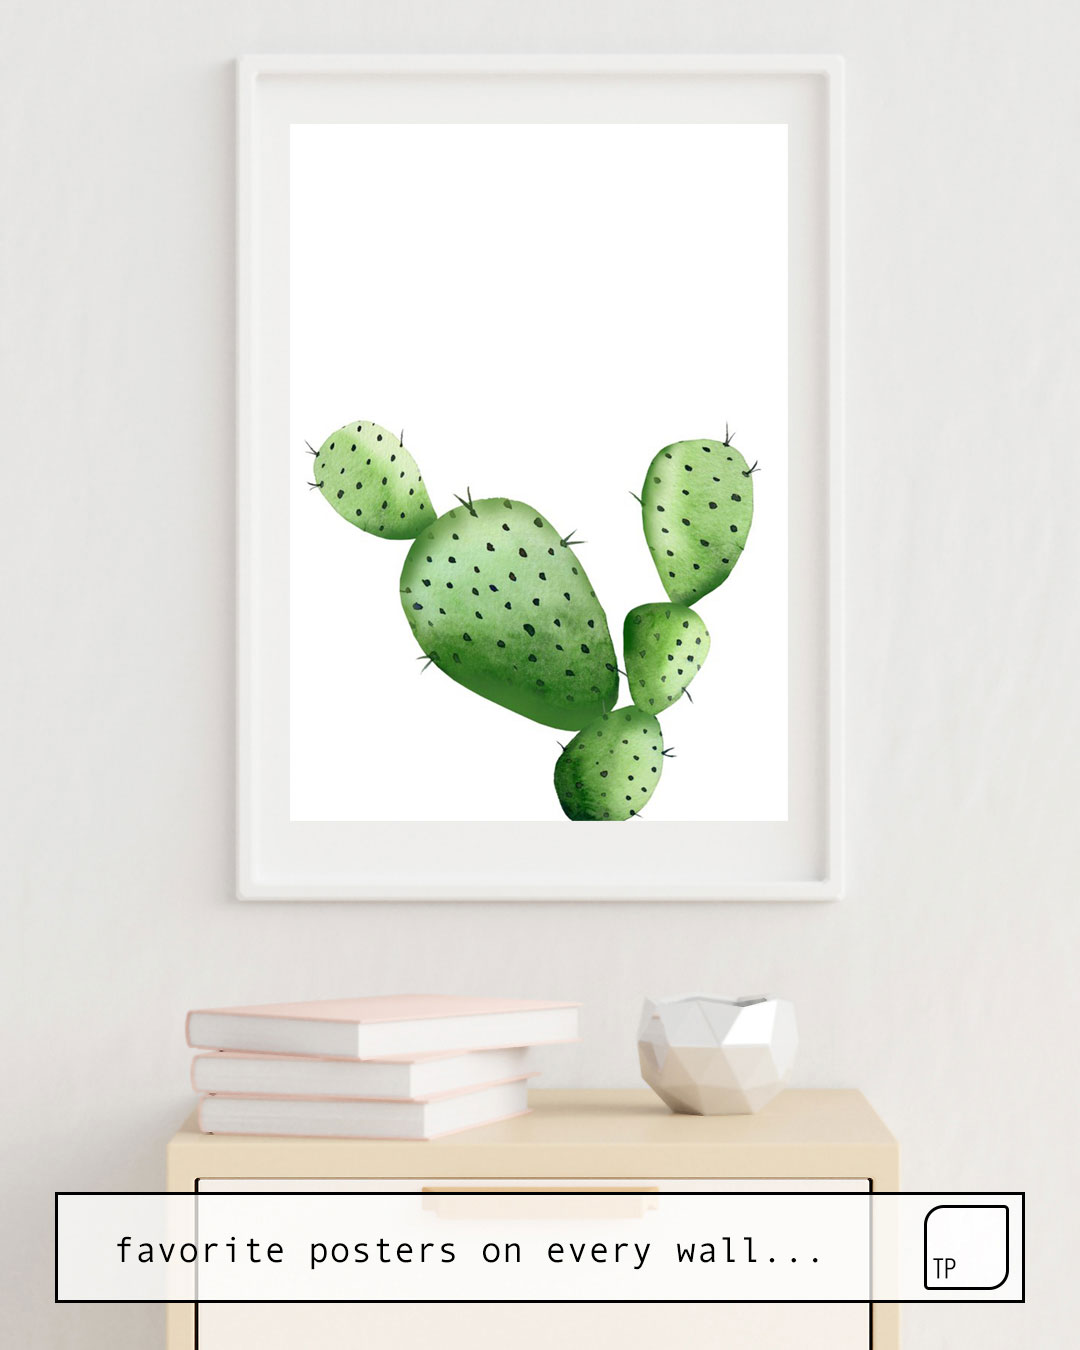 The photo shows an example of furnishing with the motif CACTUS. WATERCOLOR PLANT. by Art by ASolo as mural